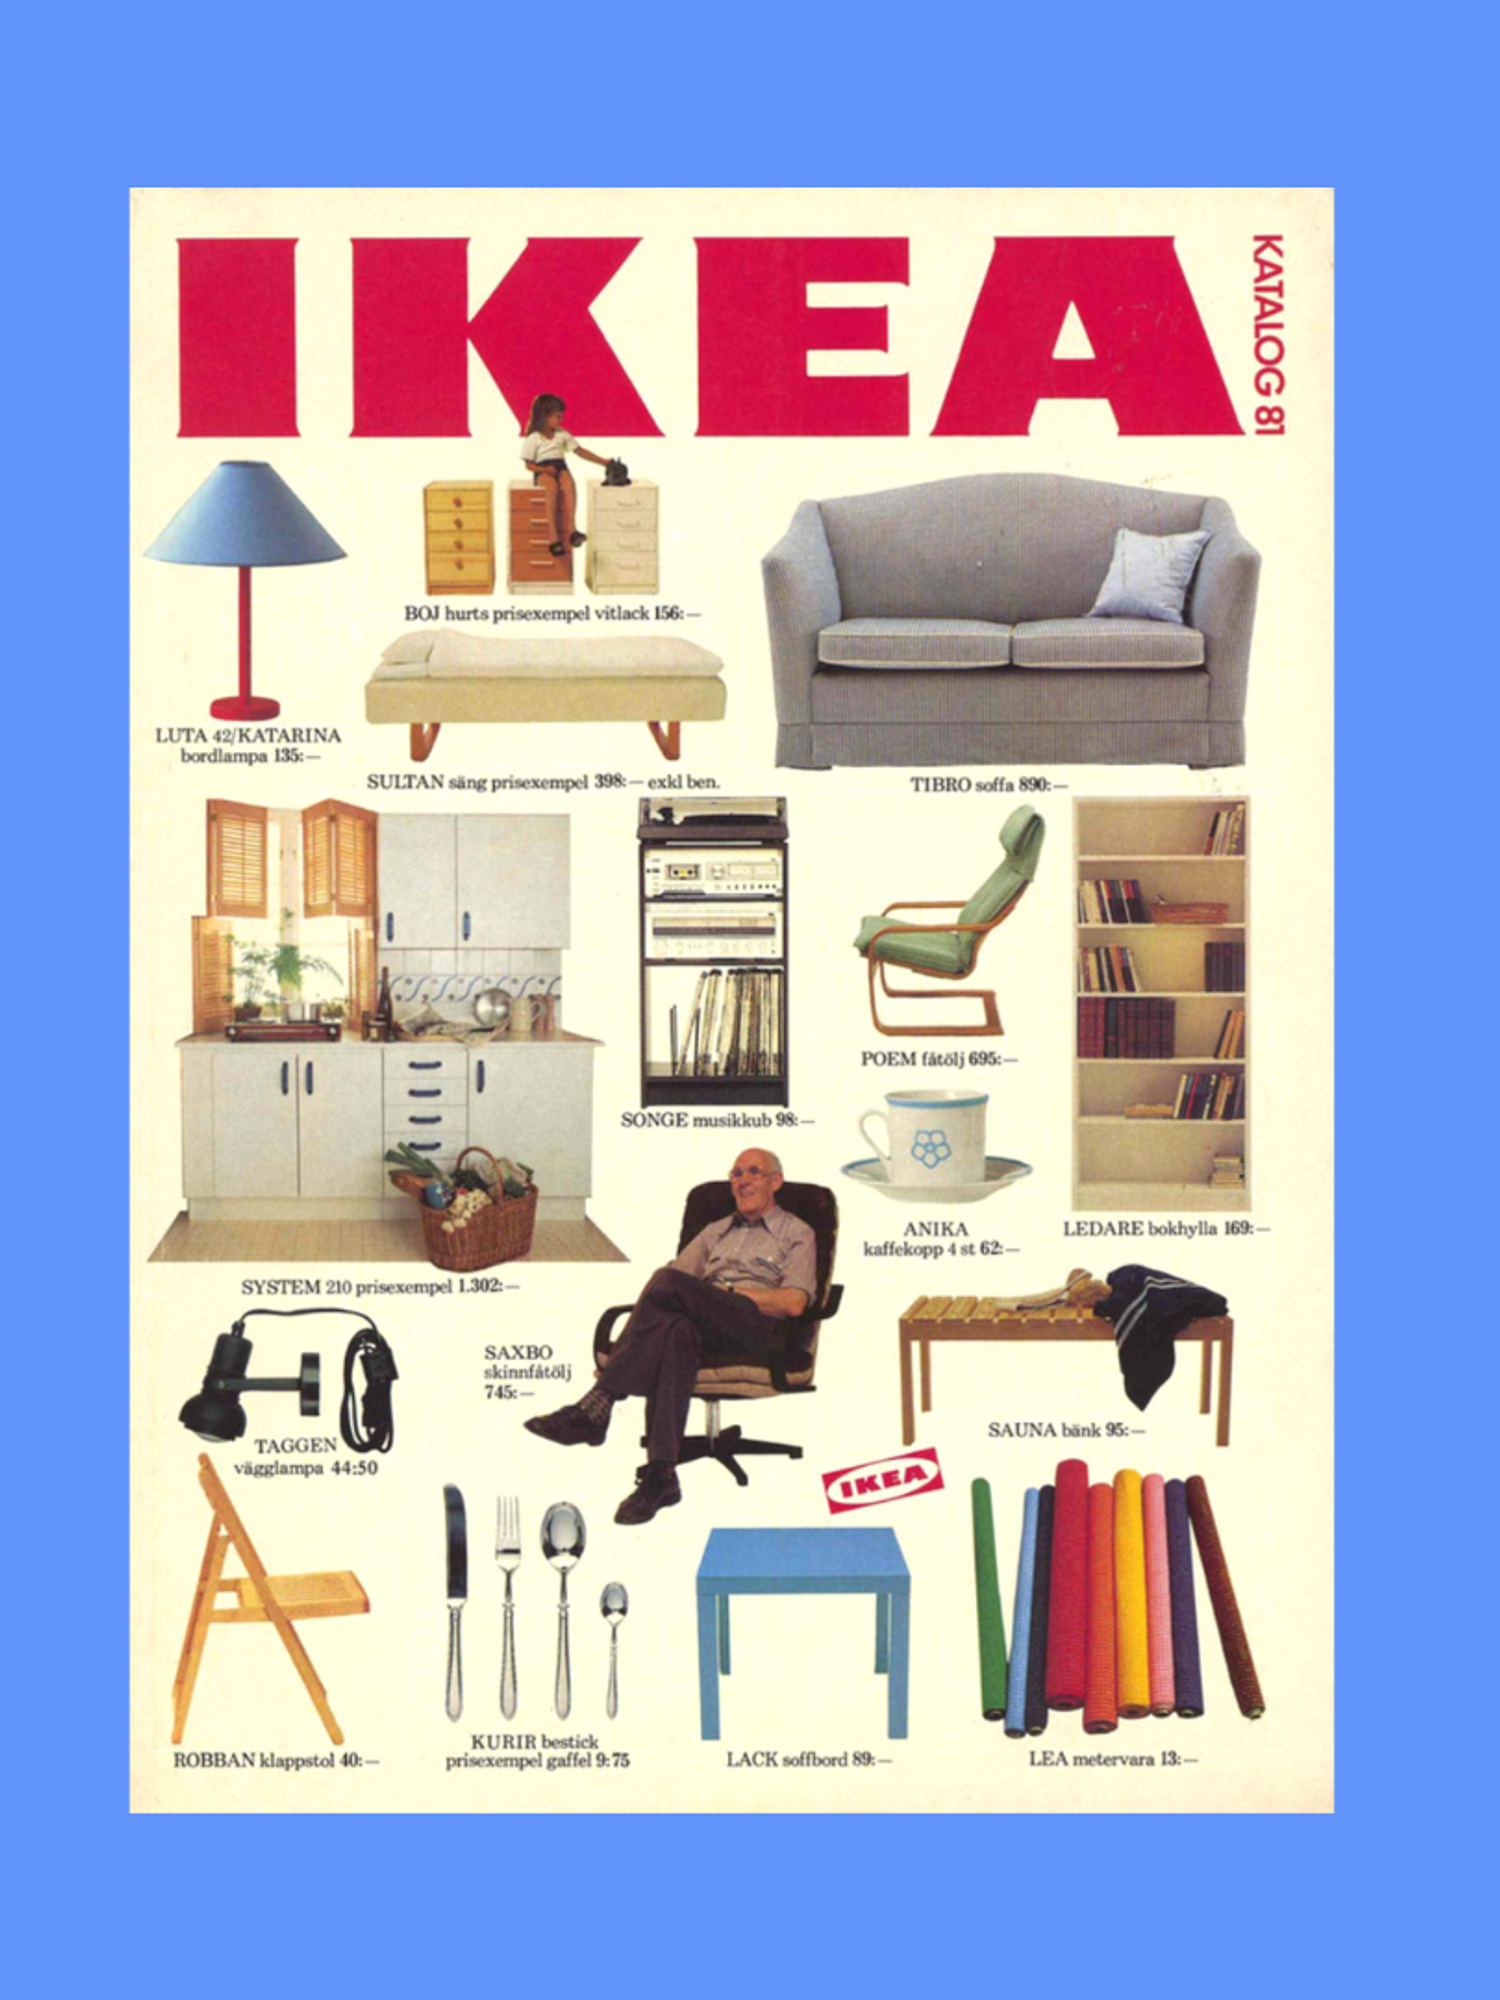 Vintage Ikea is the Cool New Design Trend